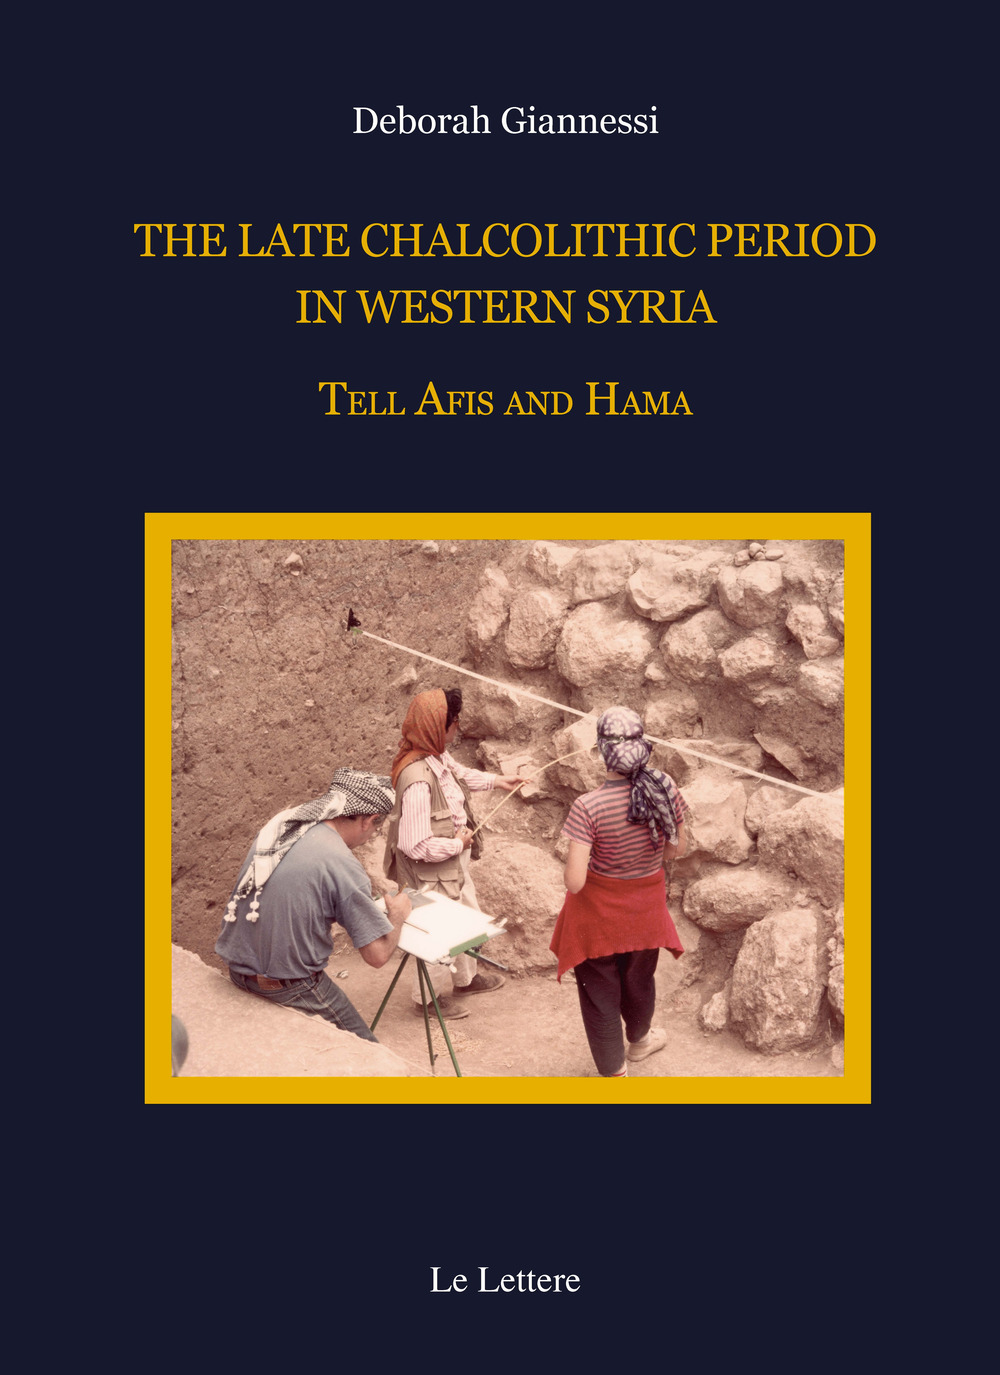 The late chalcolithic period in Western Syria. Tell Afis and Hama